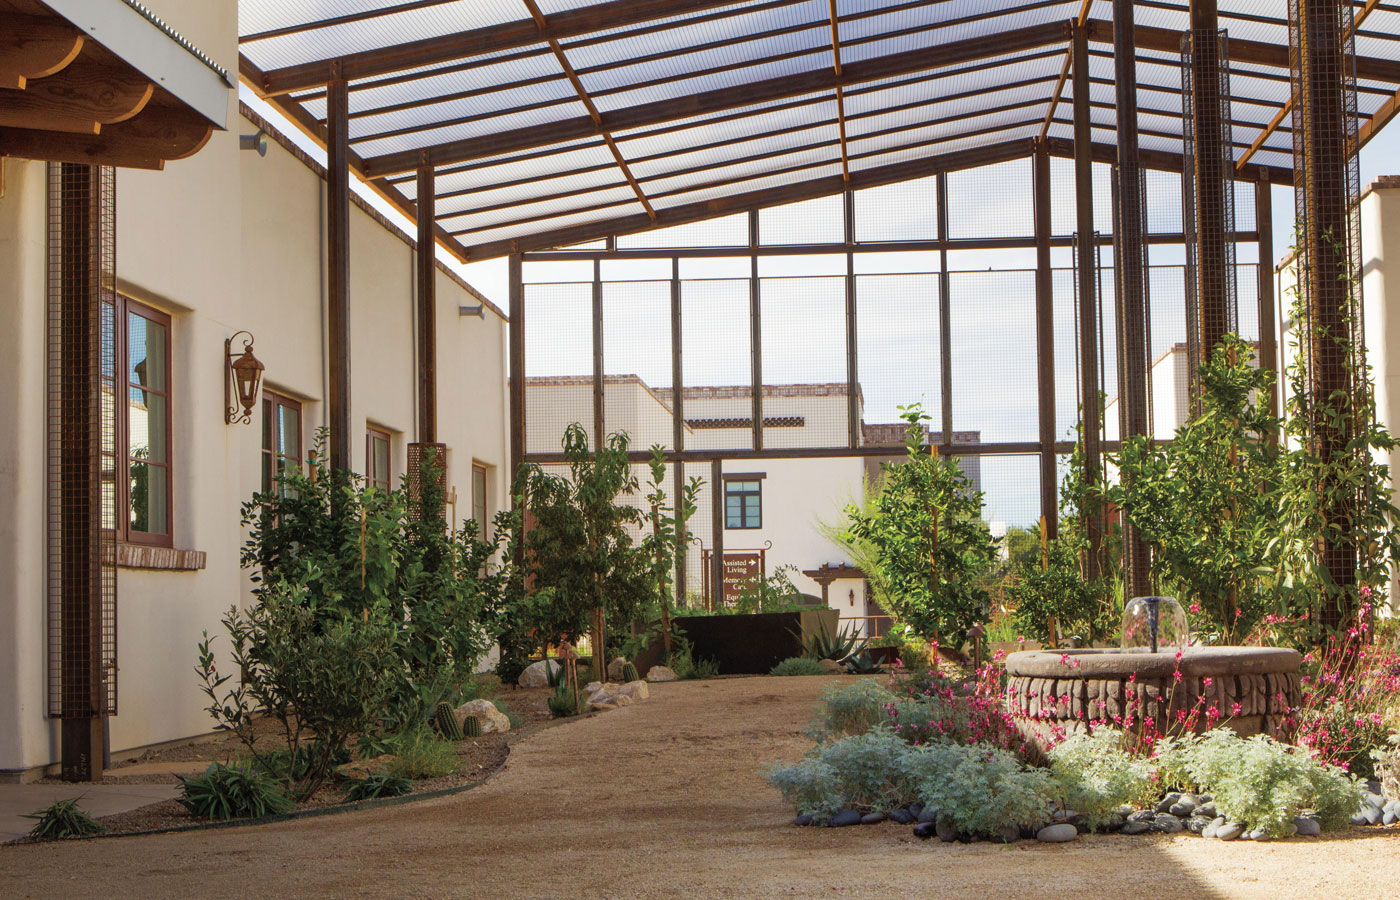 The Hacienda at the River exterior building and courtyard and greenhouse.